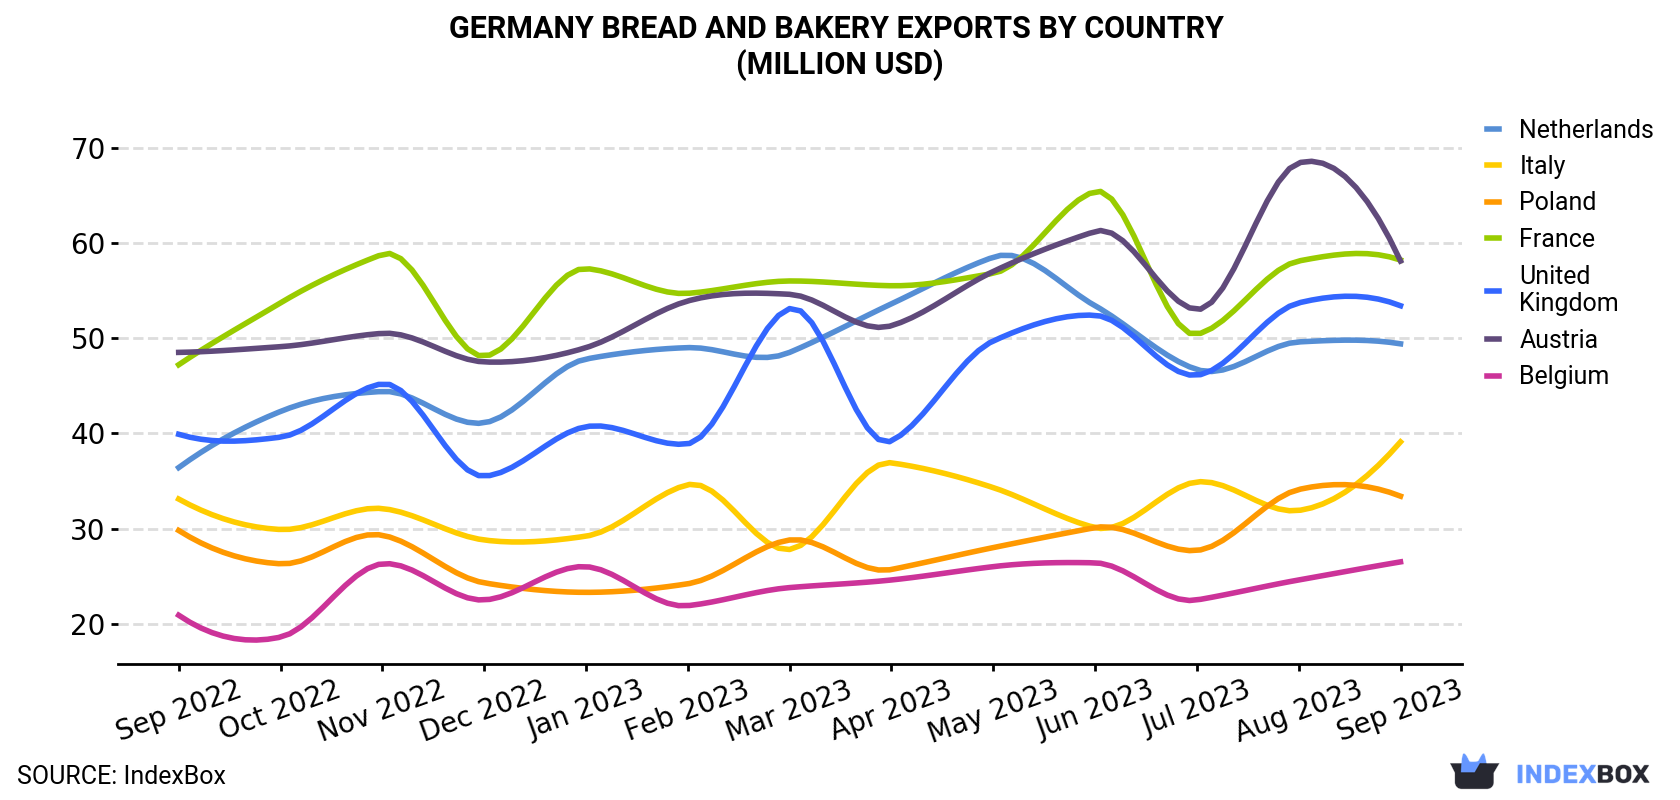 Germany Bread and Bakery Exports By Country (Million USD)